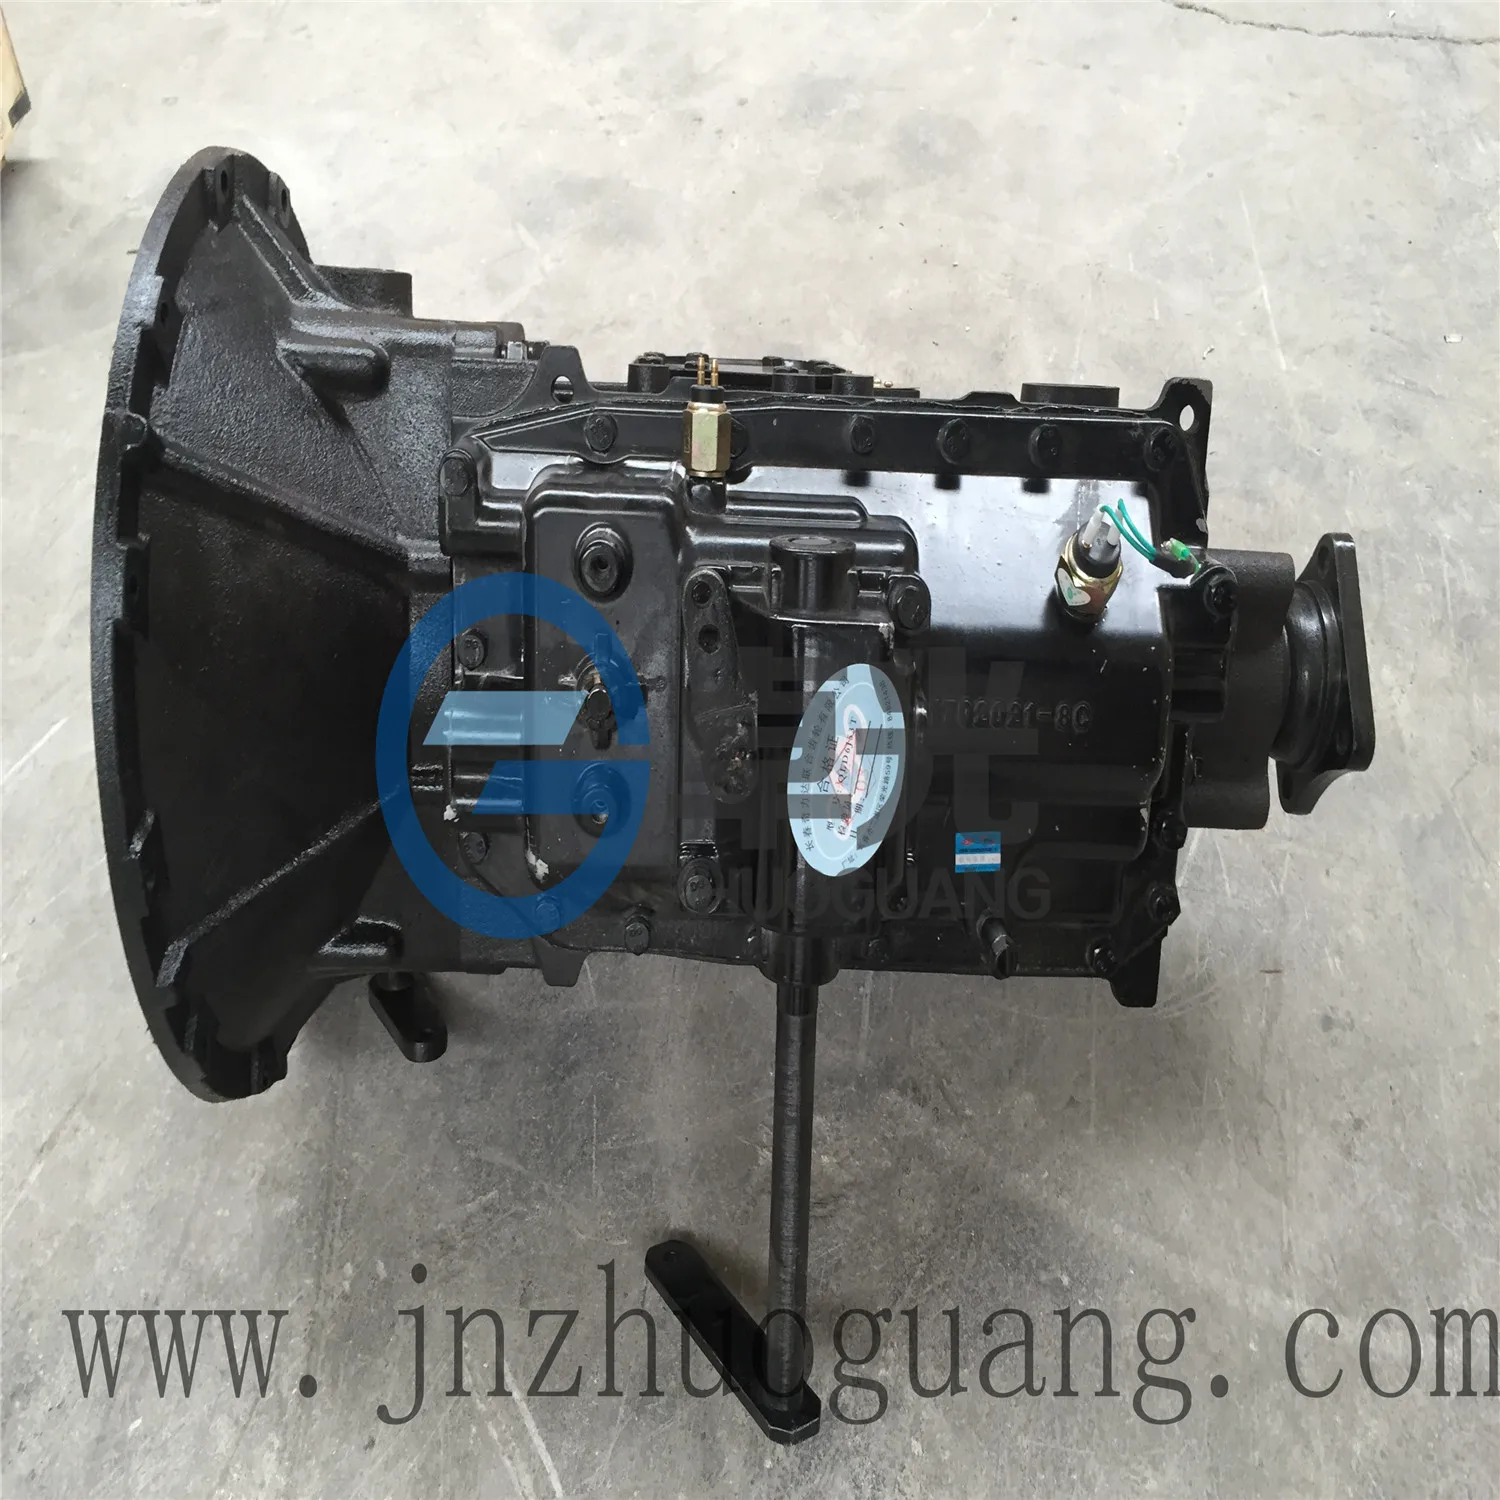 
1108917100003 Foton Gearbox specially Foton 1099 exclusive agent for Russian market Hot sale high quality auman aumark 